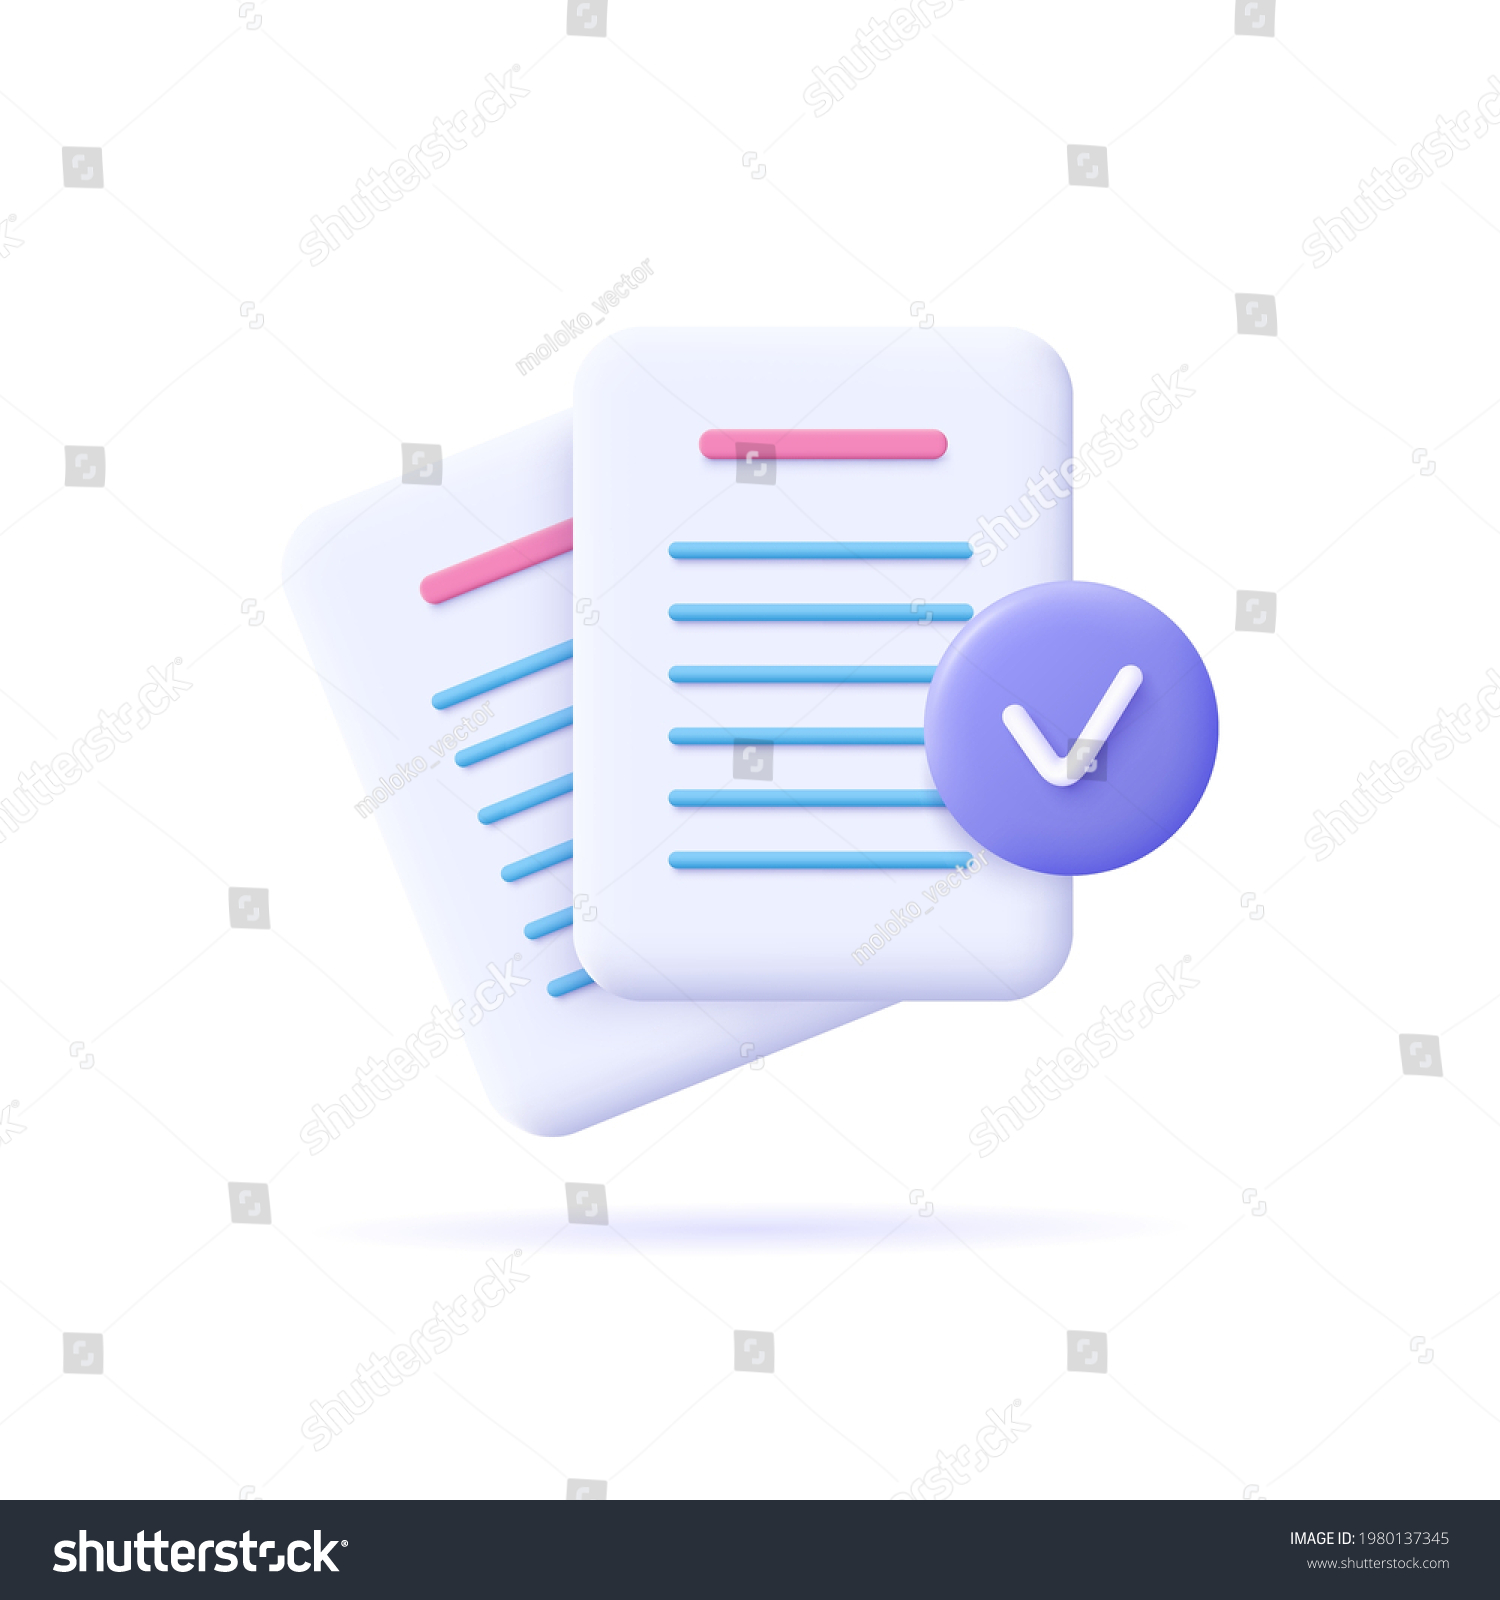 Documents icon. Stack of paper sheets. Confirmed or approved document. Business icon. 3d vector illustration. #1980137345